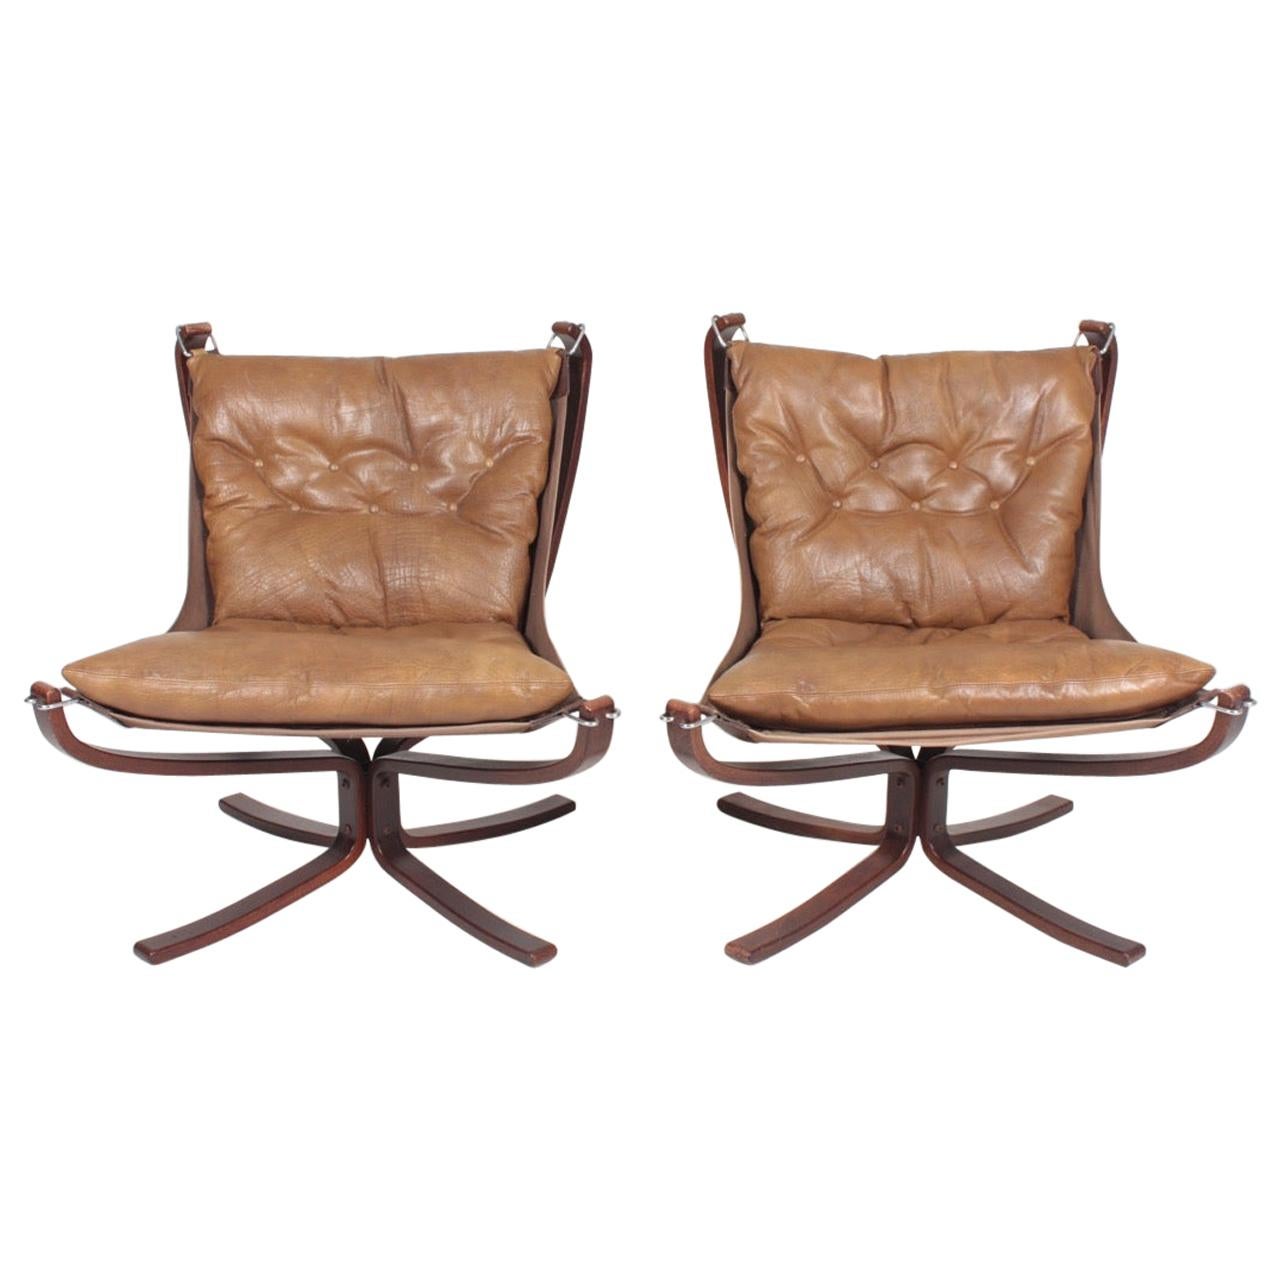 Pair of Midcentury Falcon Chairs in Patinated Leather by Sigurd Resell